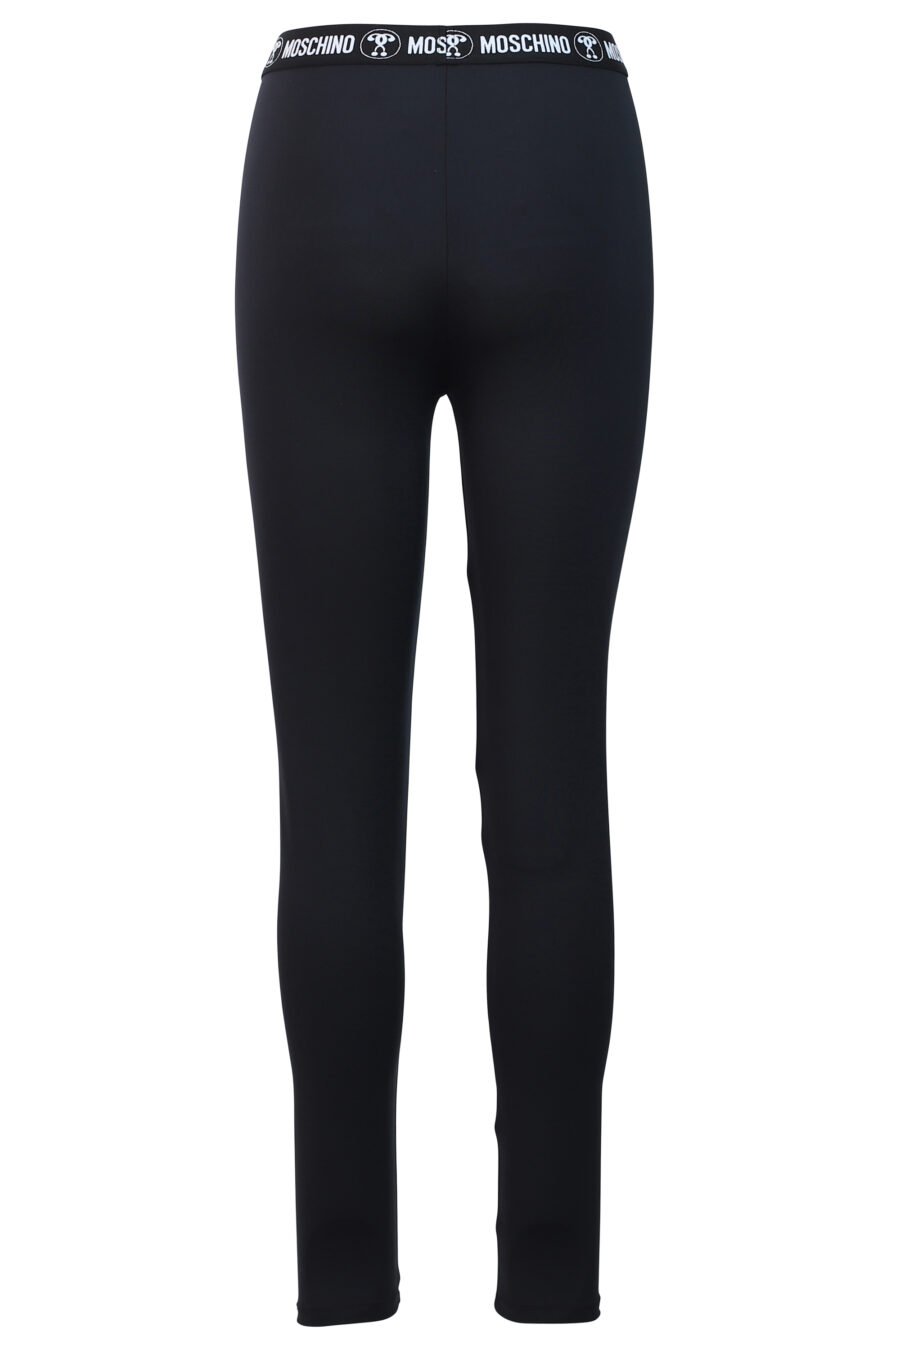 Black leggings with double question logo on tape - IMG 0688